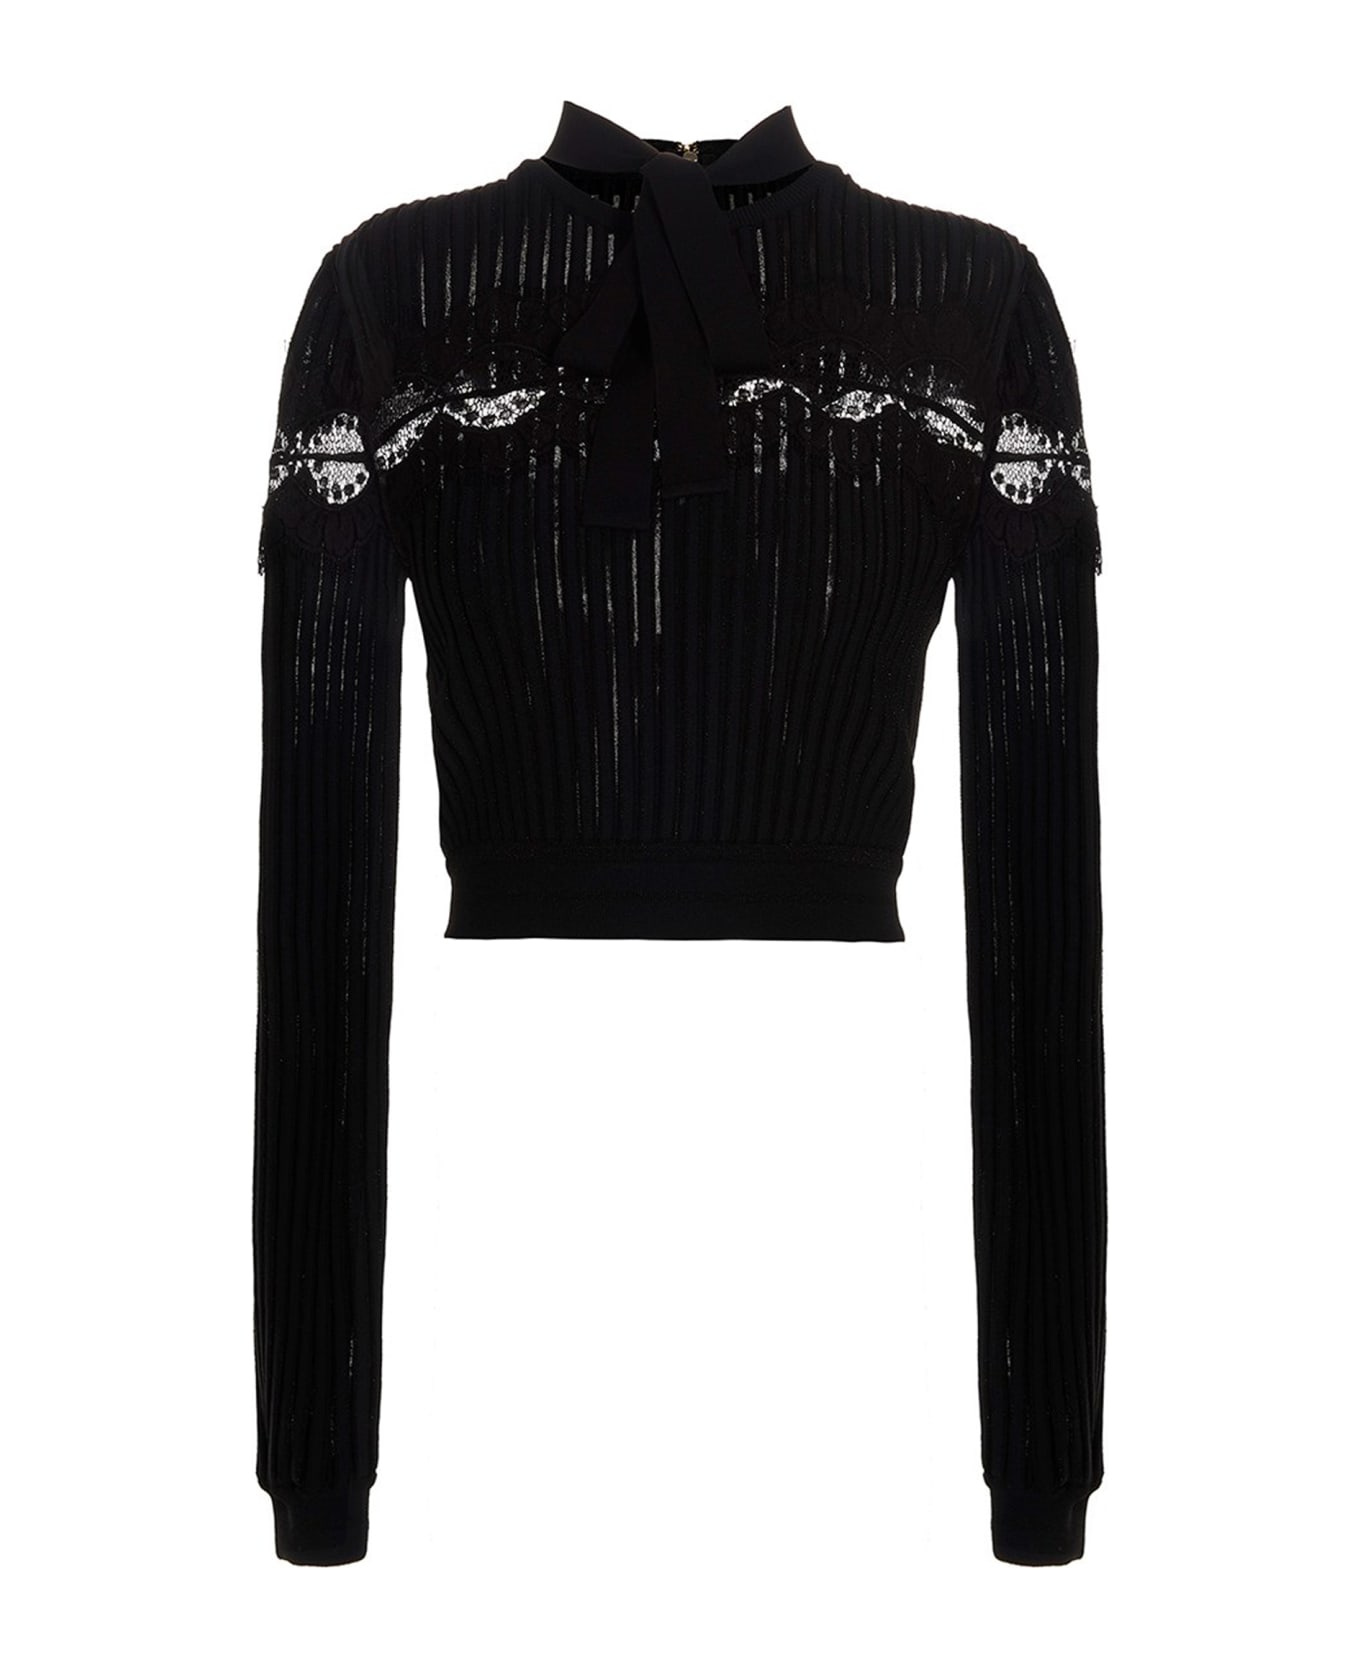 Elie Saab Bow Lace Sweater Top - Black  